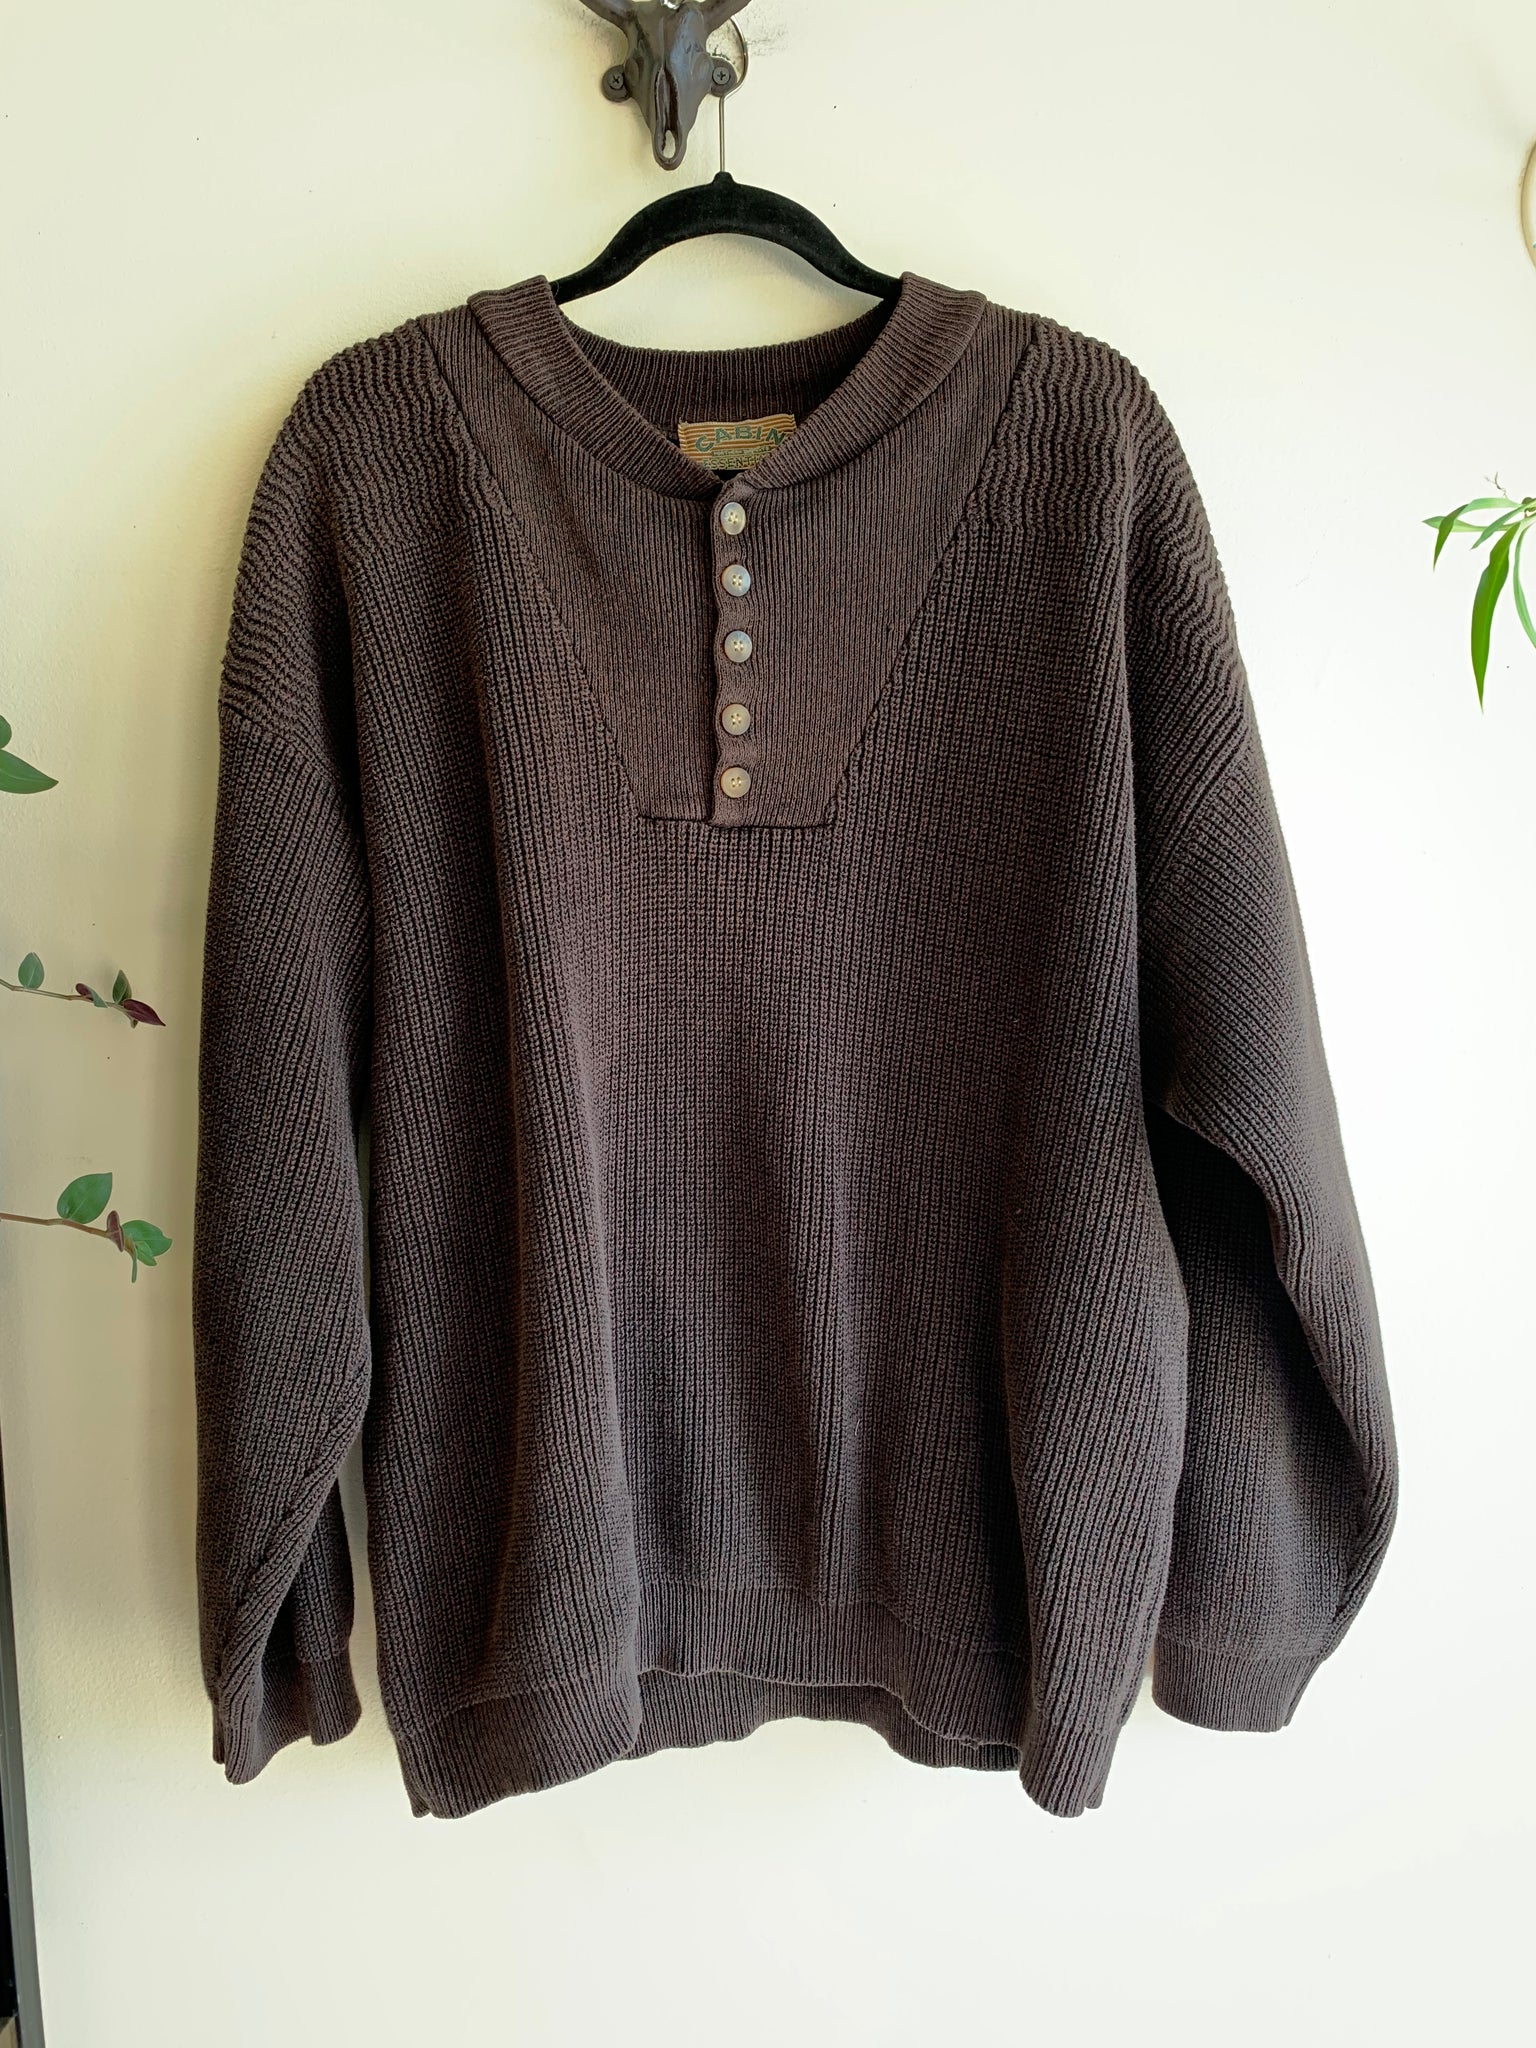 Northern Elements Brown Knit Sweater - L